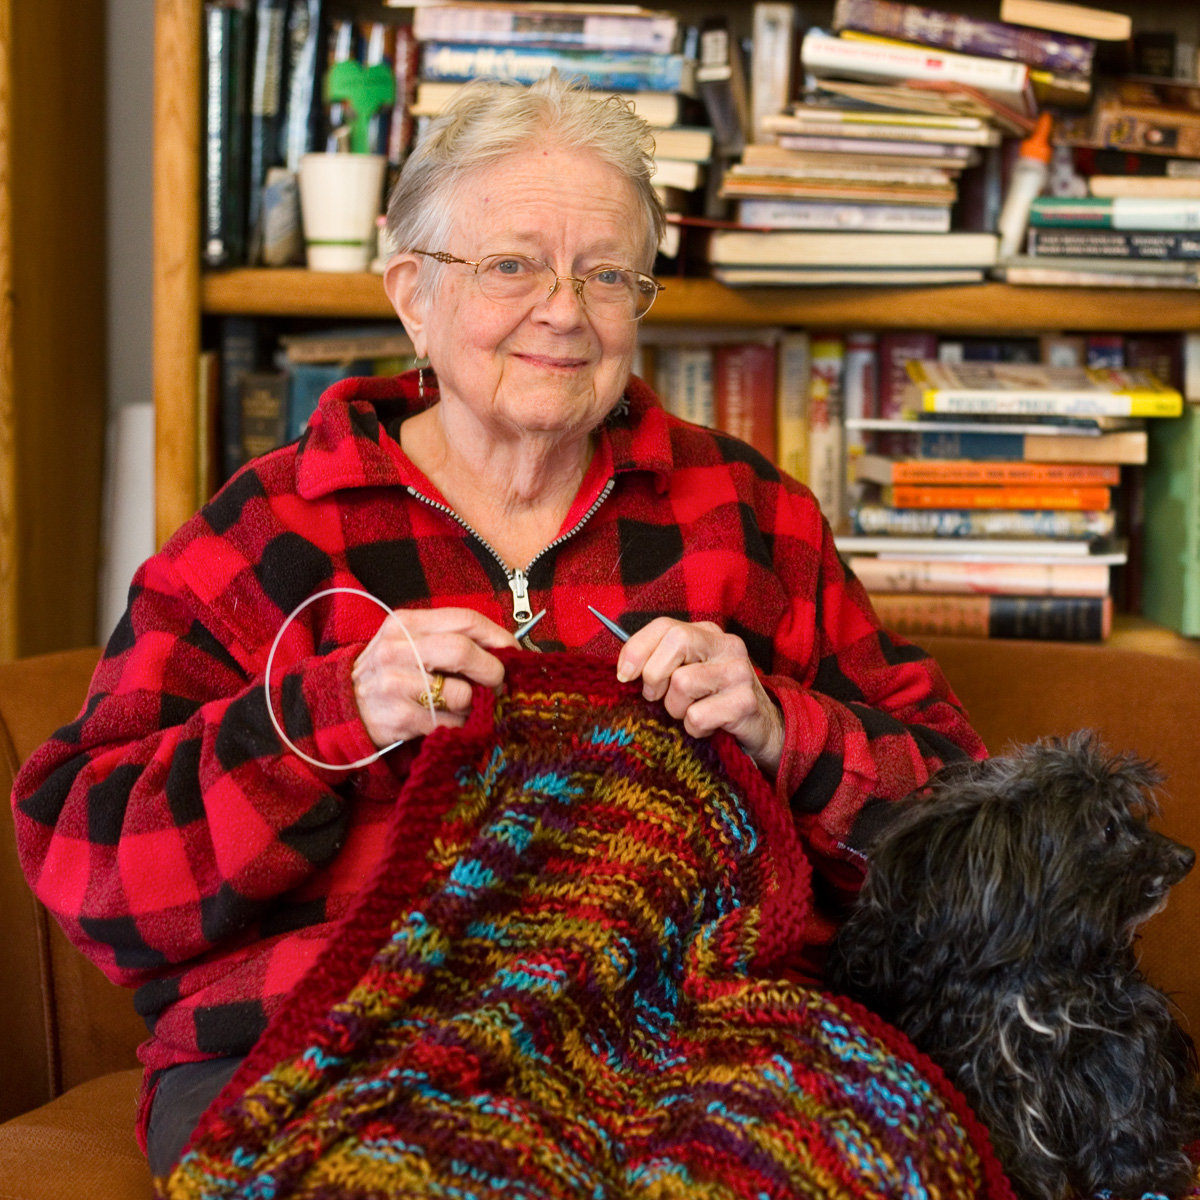 Judy Gibson has lived in the Midway neighborhood for more than 40 years. She has found lasting friendships through the Hamline Midway Elders Knitting and Crochet Group. The group currently meets on Zoom, but hopes to return to in-person meetings in the not-too-distant future. (Photo by Margie O’Loughlin)